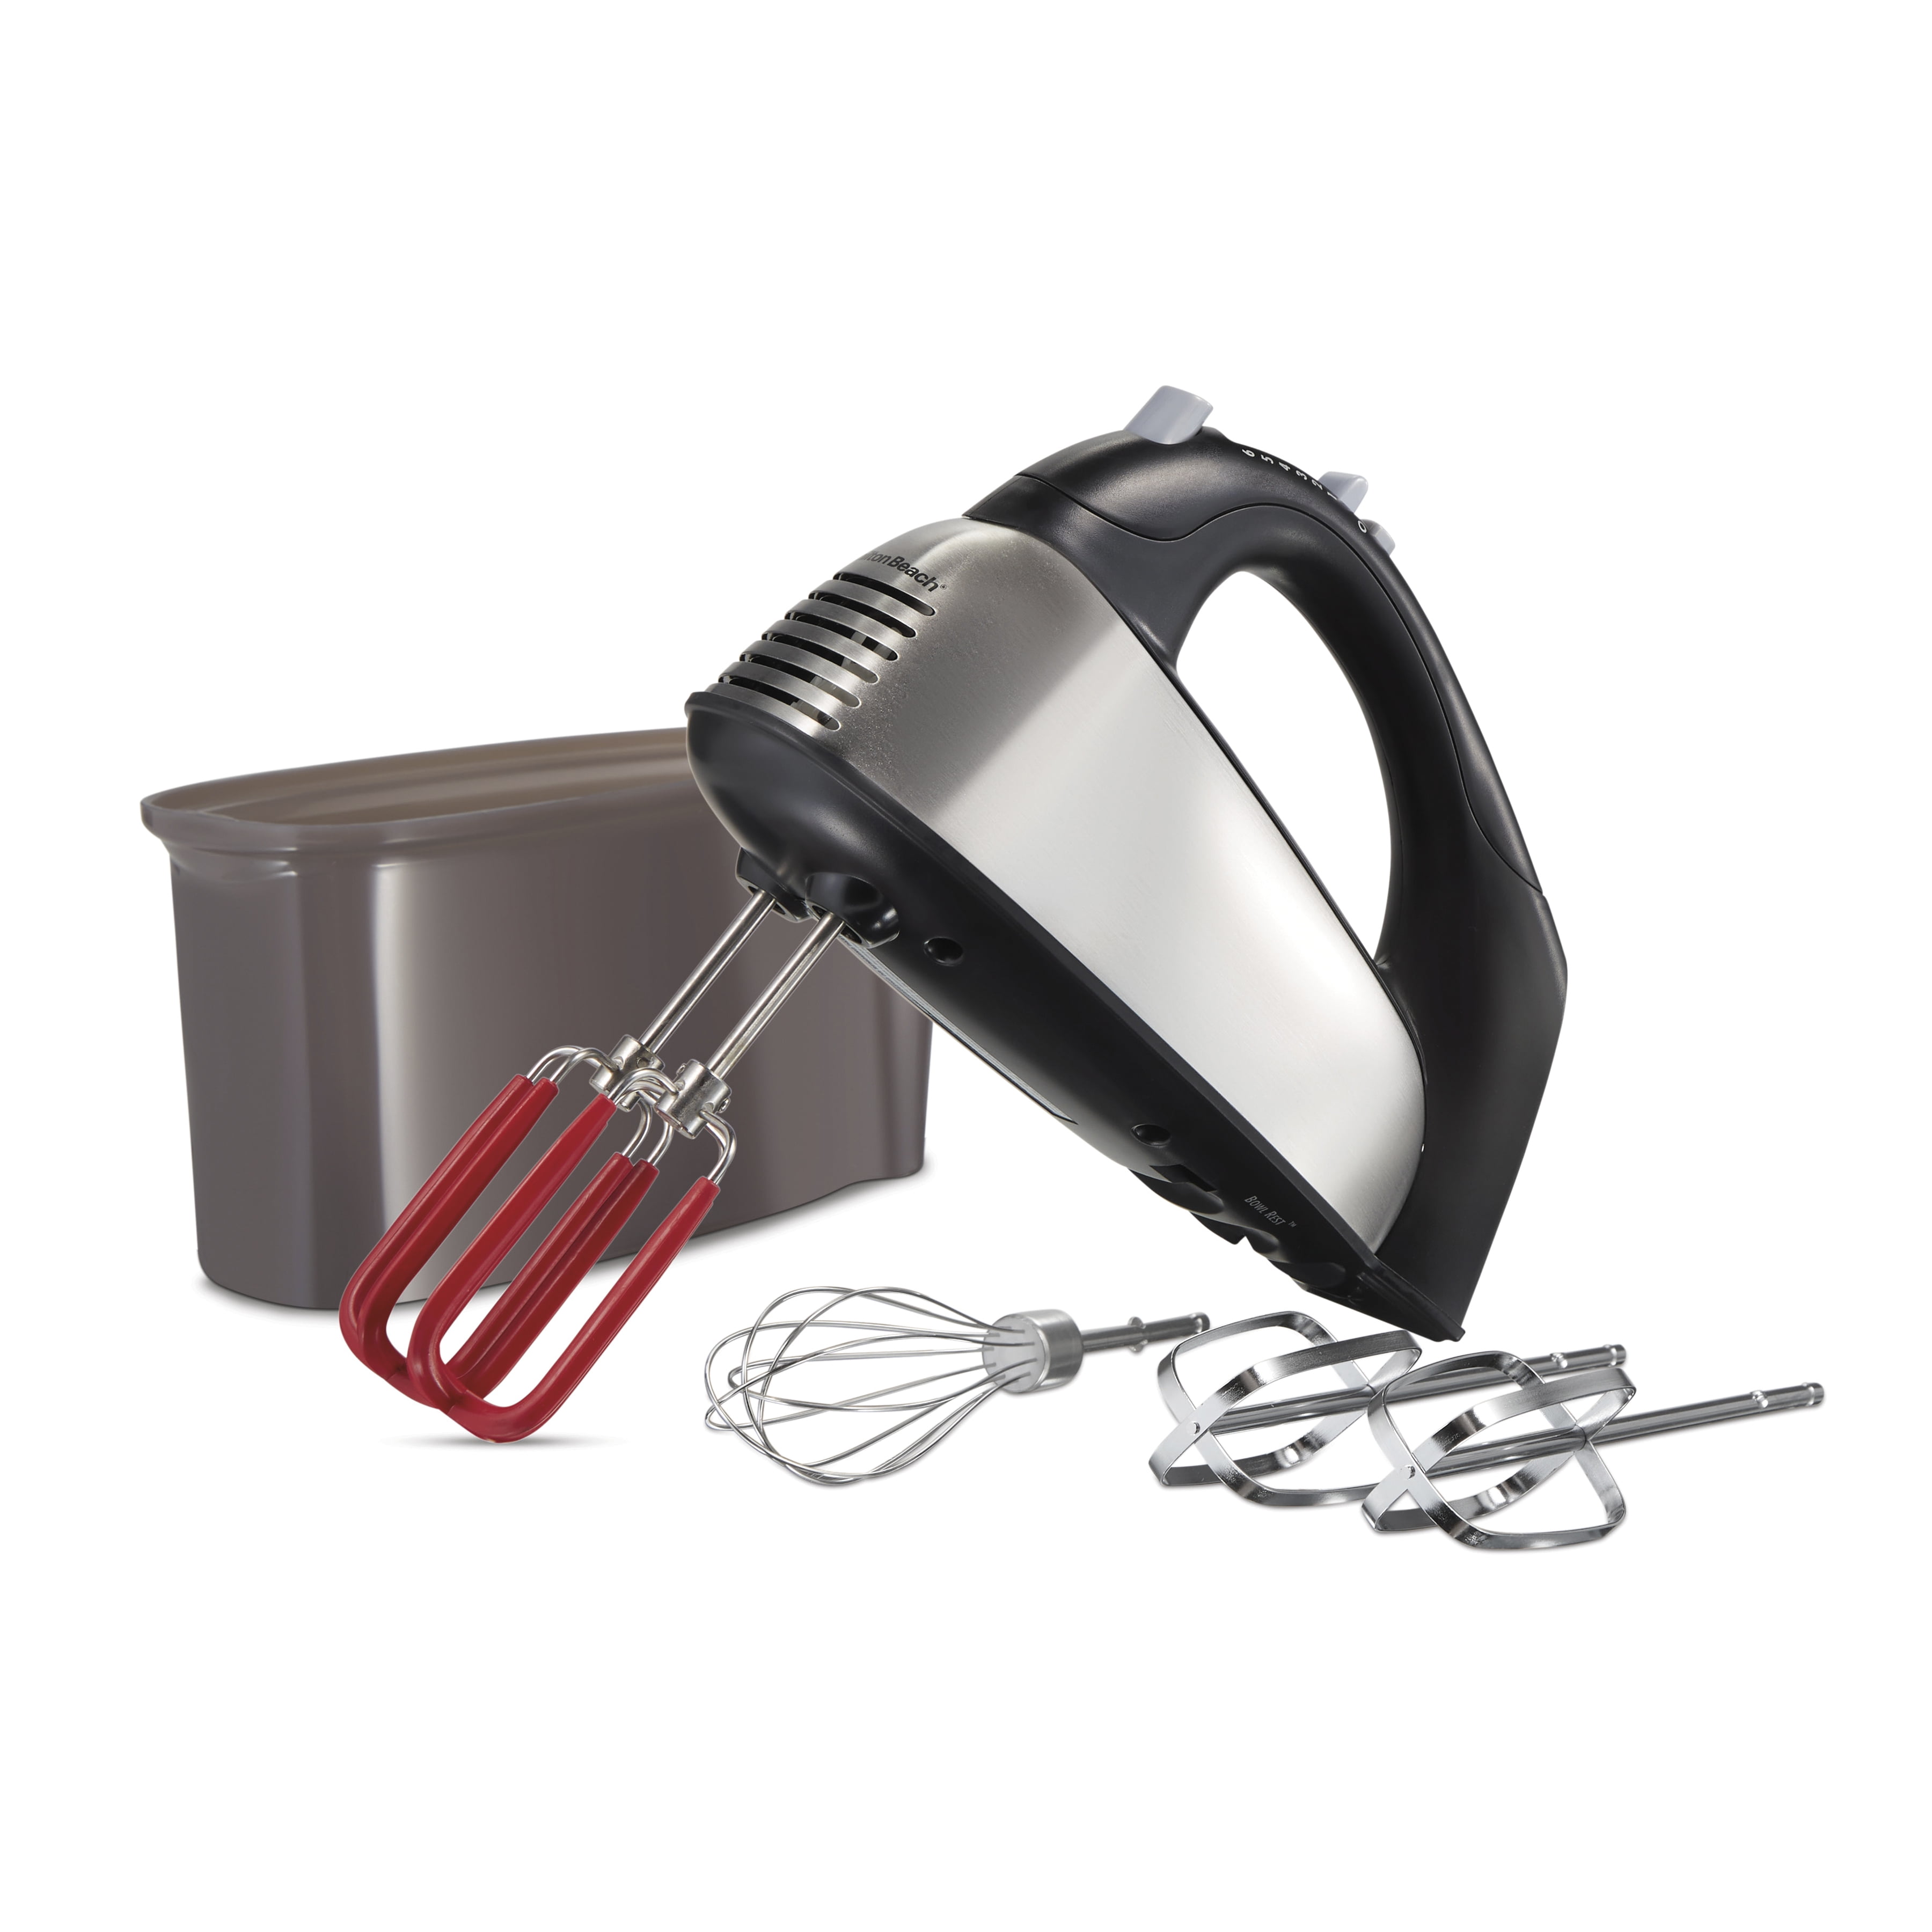 24 Paddle Attachment Hand Mixer Images, Stock Photos, 3D objects